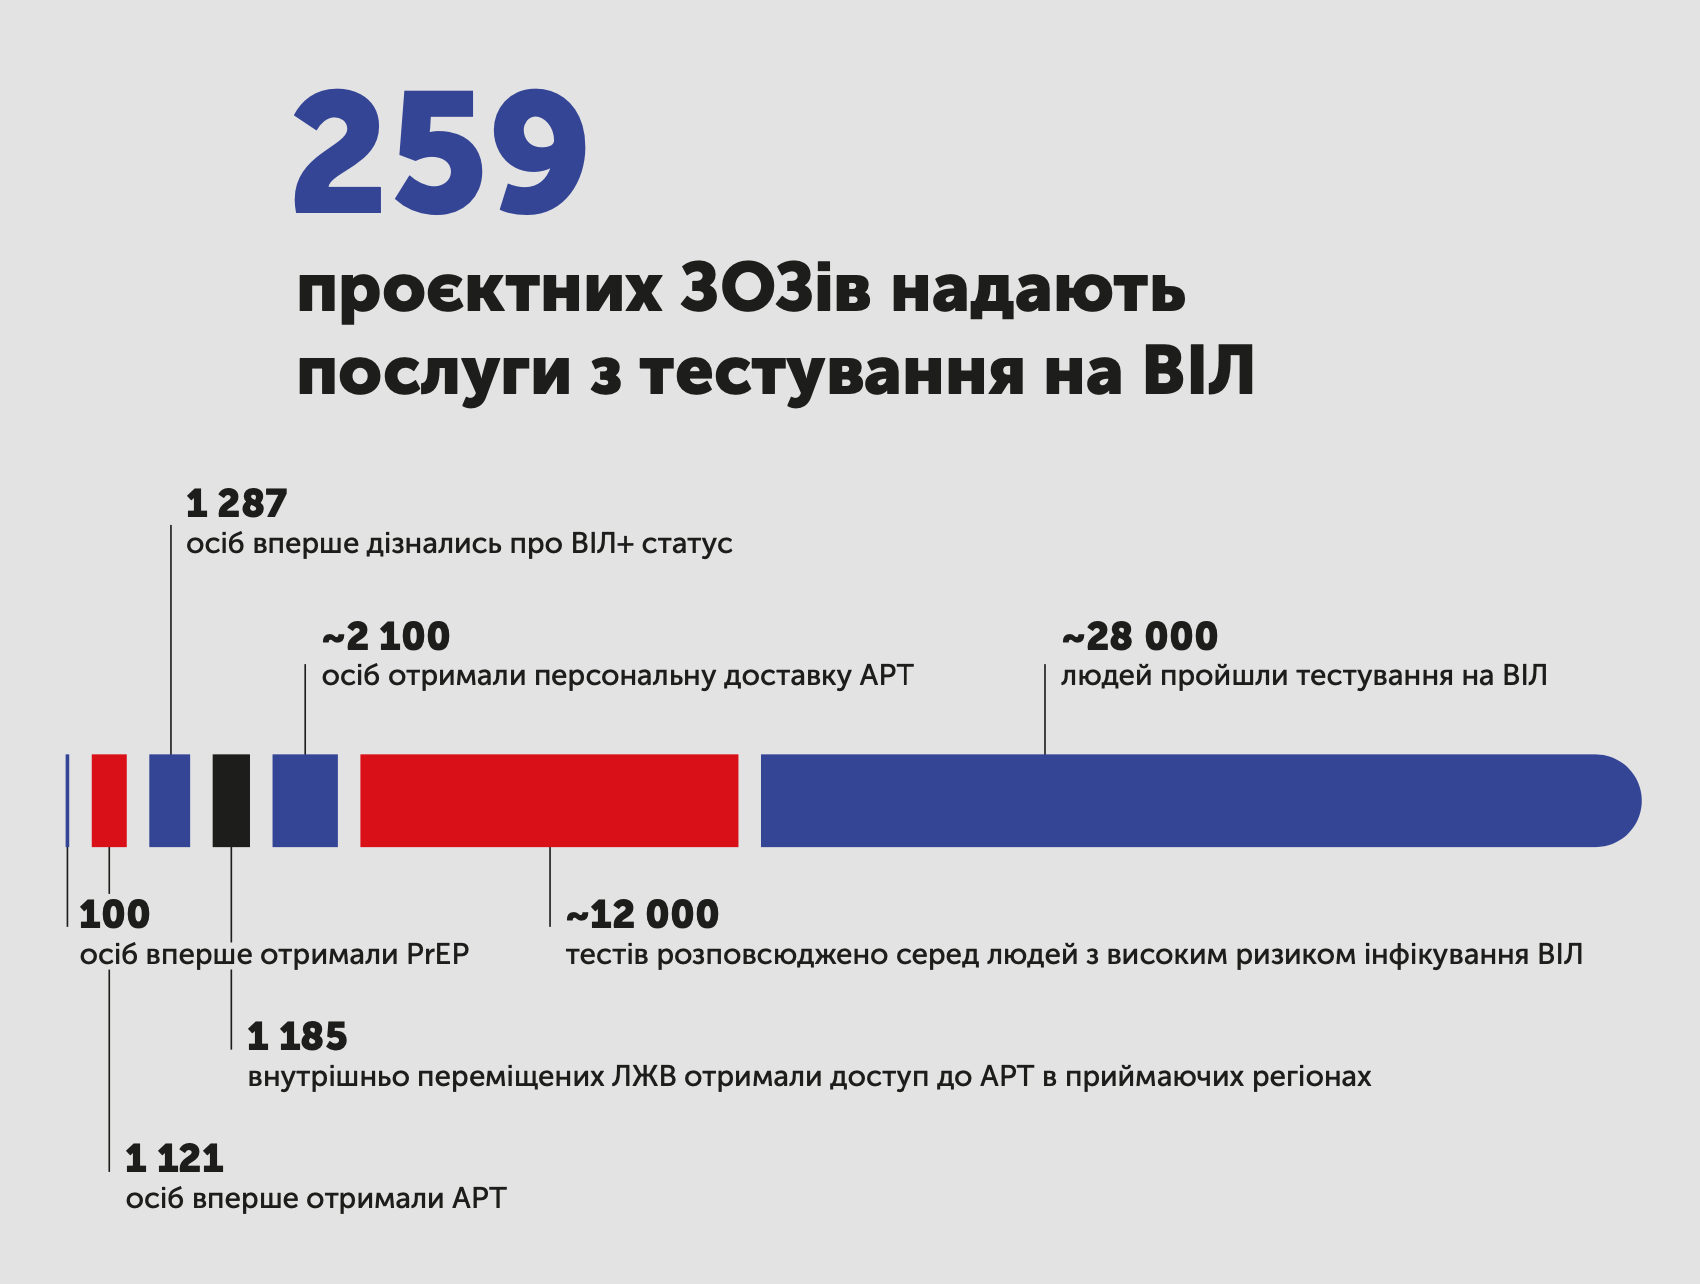 HealthLink: How many people and organizations did we provide the assistance  during 4 months of full-scale war in Ukraine?